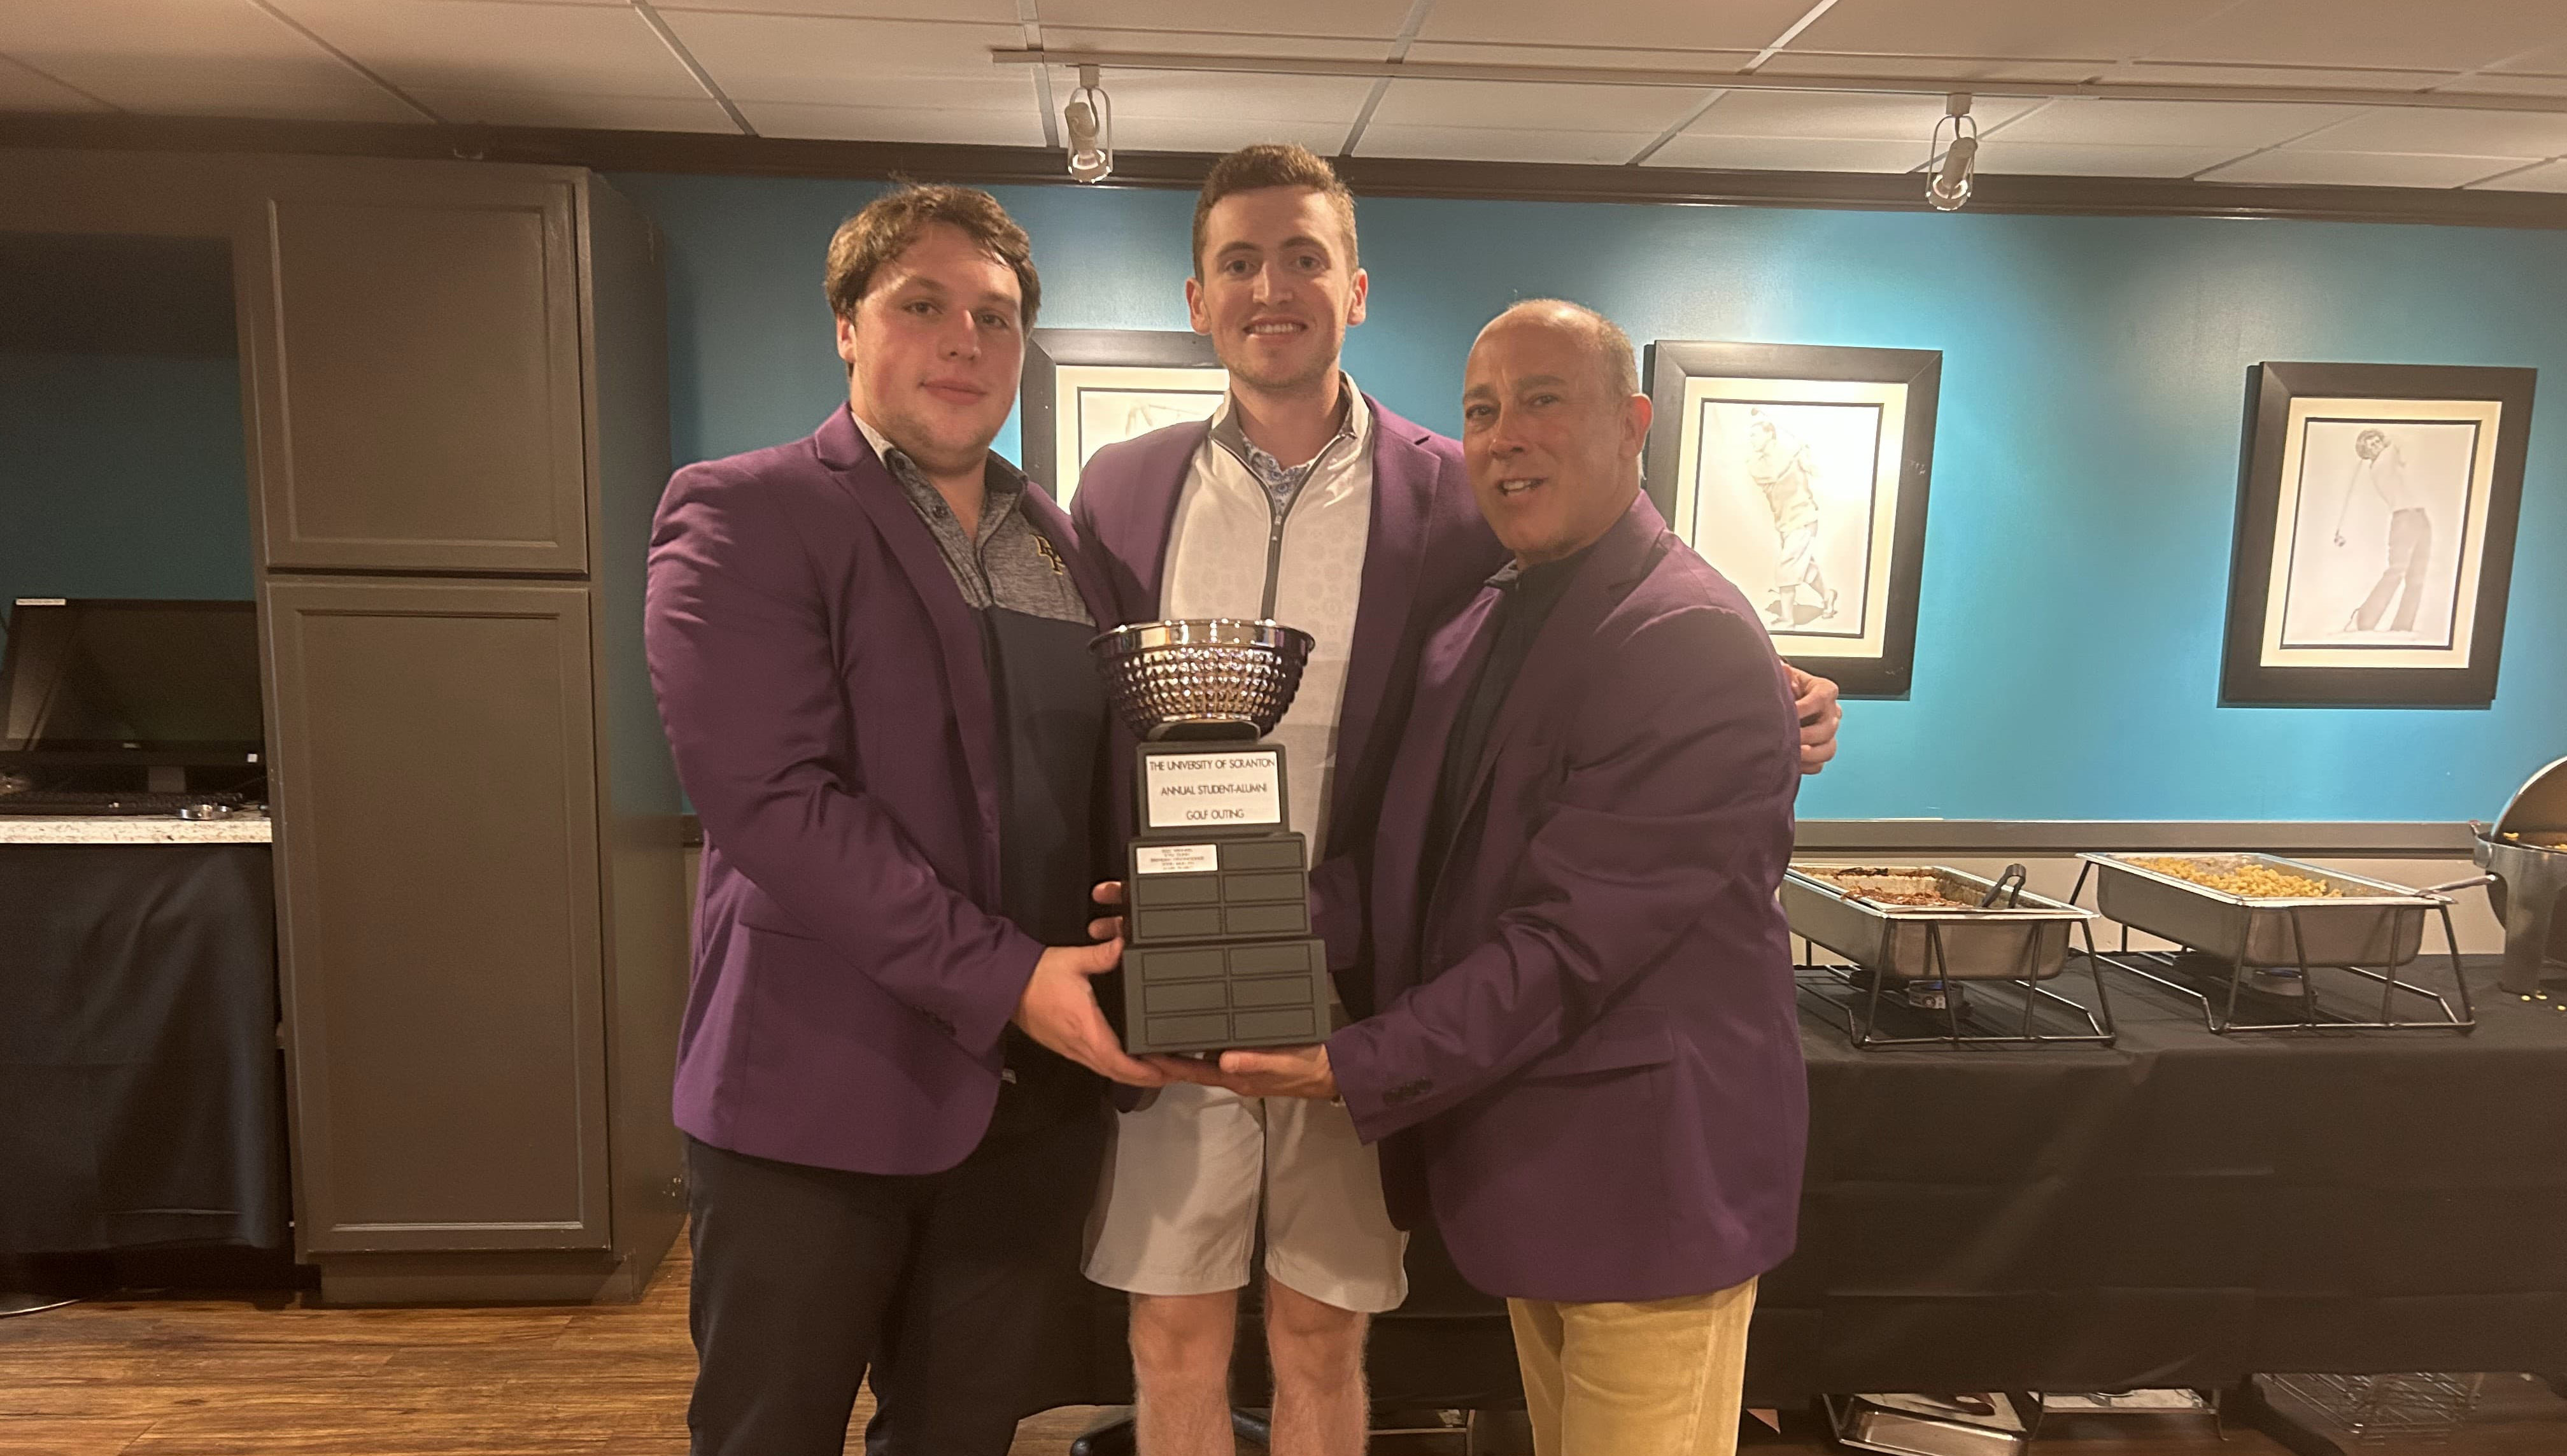 From left, Alex Kenneson ’24, Liam Dunfee ’24 and Al Guari ’88 enjoy a moment together after winning the 2023 Alumni-Student Golf outing. Kevin Gremse '87, not pictured, also won the tournament.